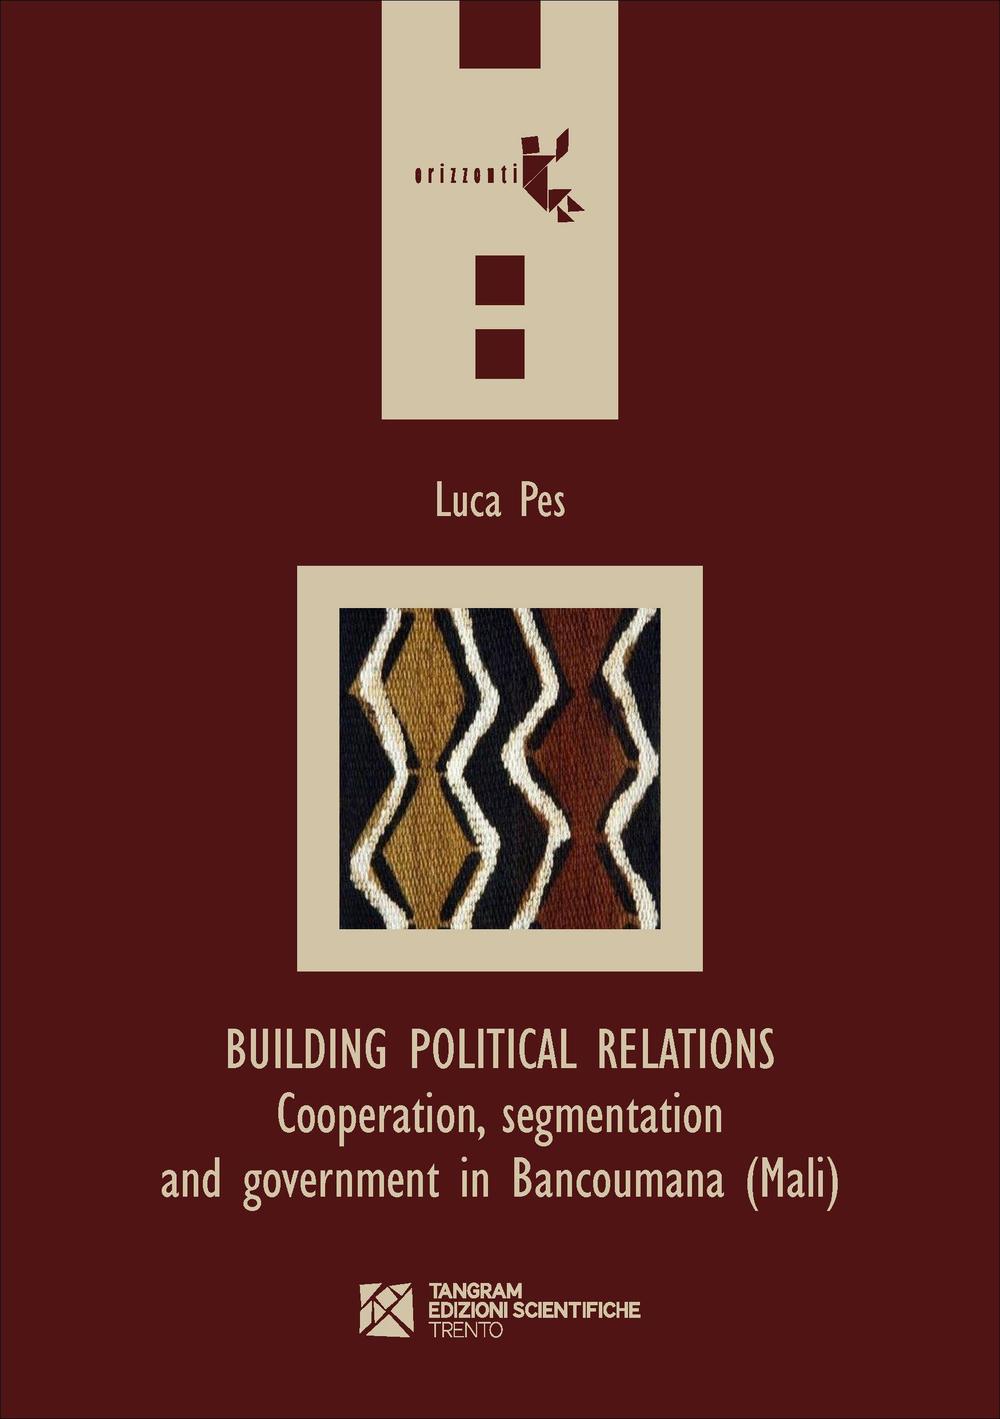 Building political relations. Cooperation, segmentation and government in Bancoumana (Mali)